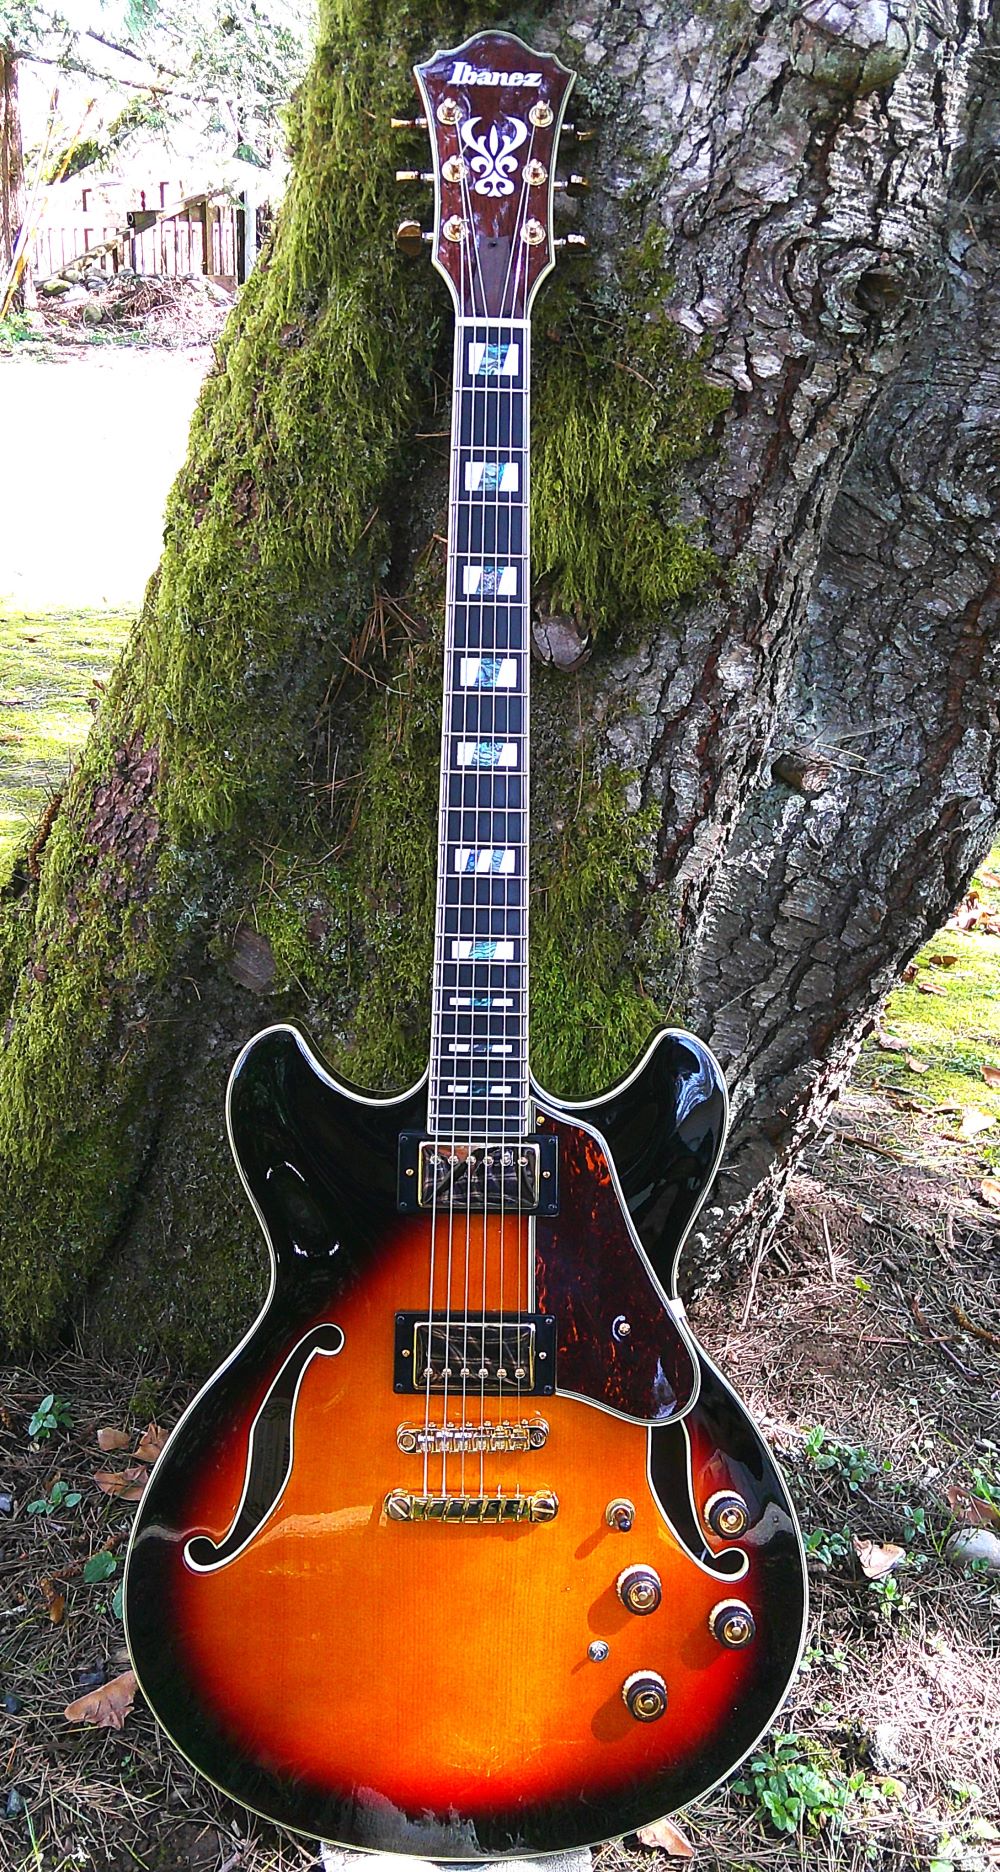 ES-335 style guitar love thread, no telecasters allowed-as113-2-jpg